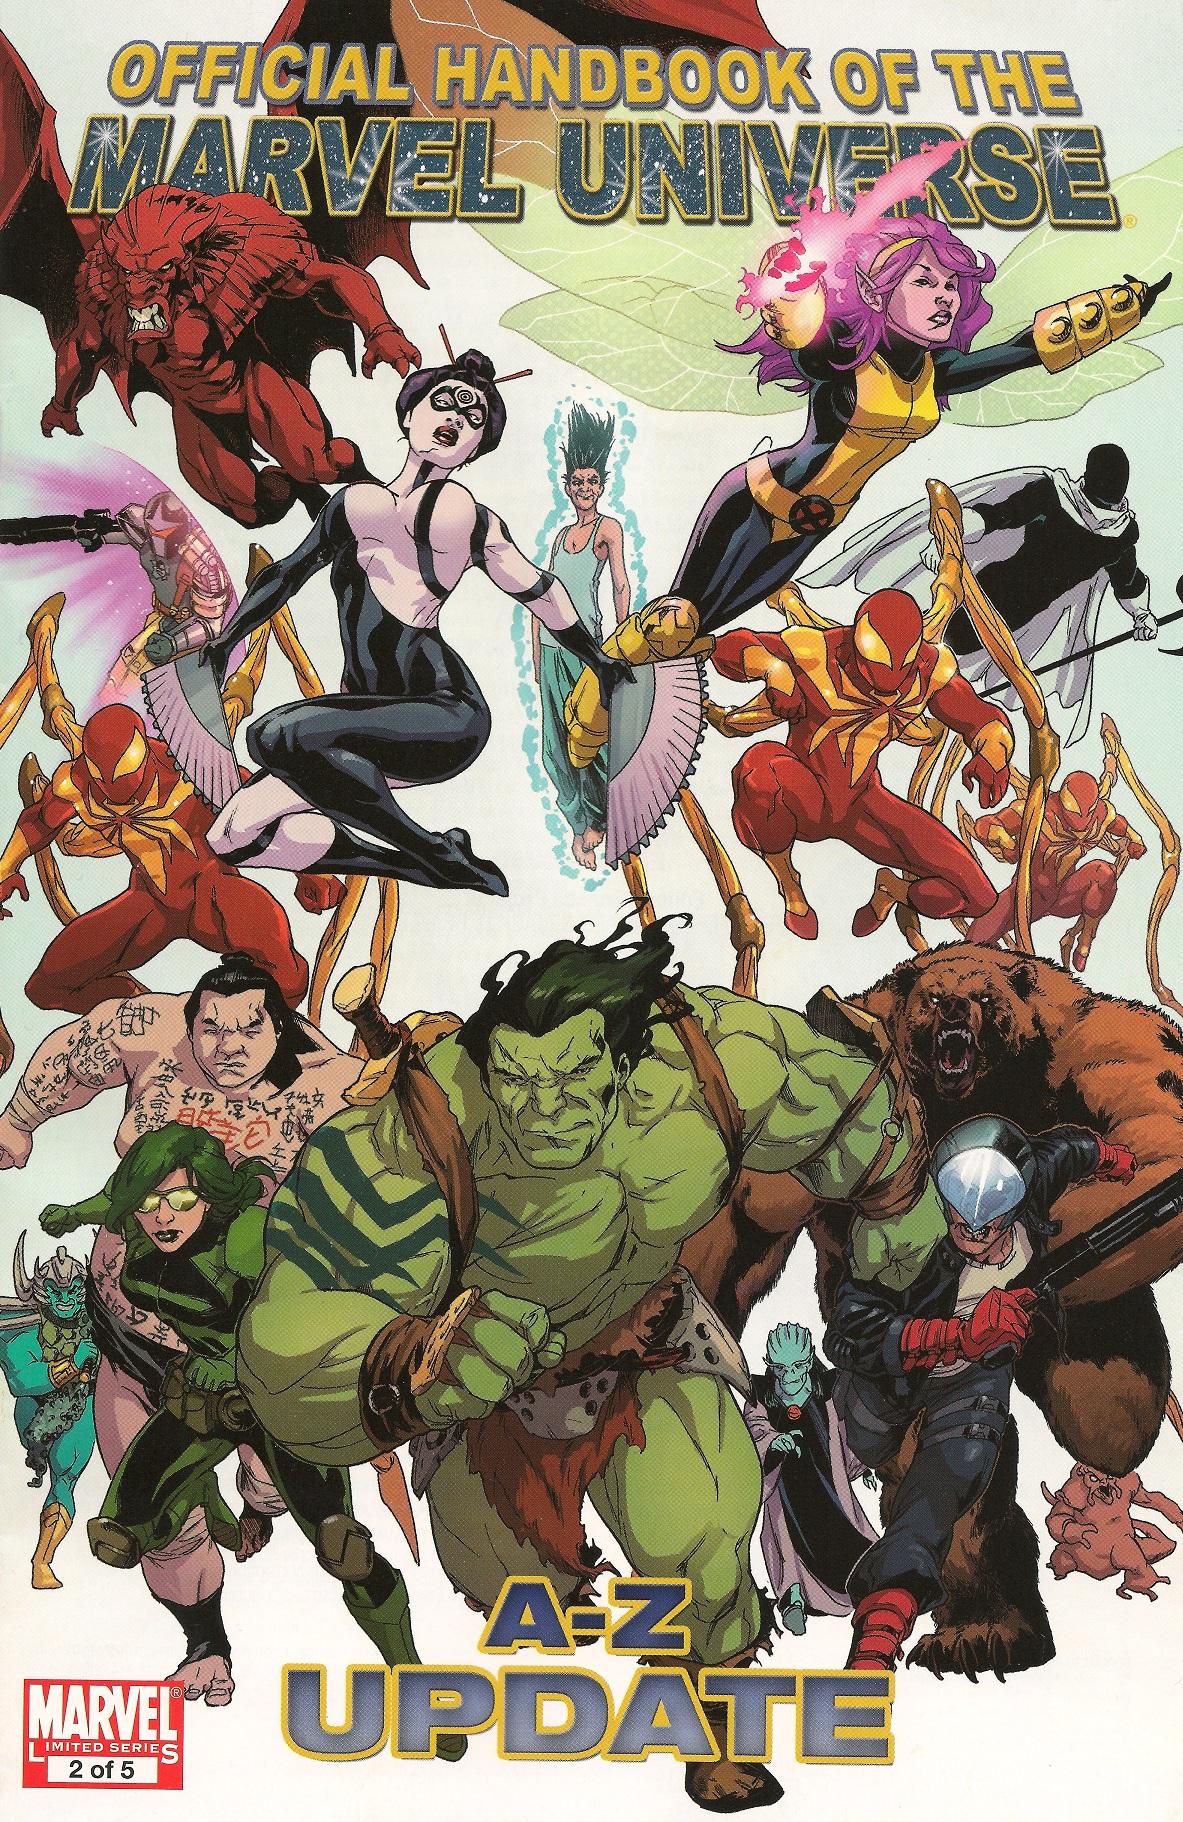 Official Handbook of the Marvel Universe A-Z Update Vol. 1 #2